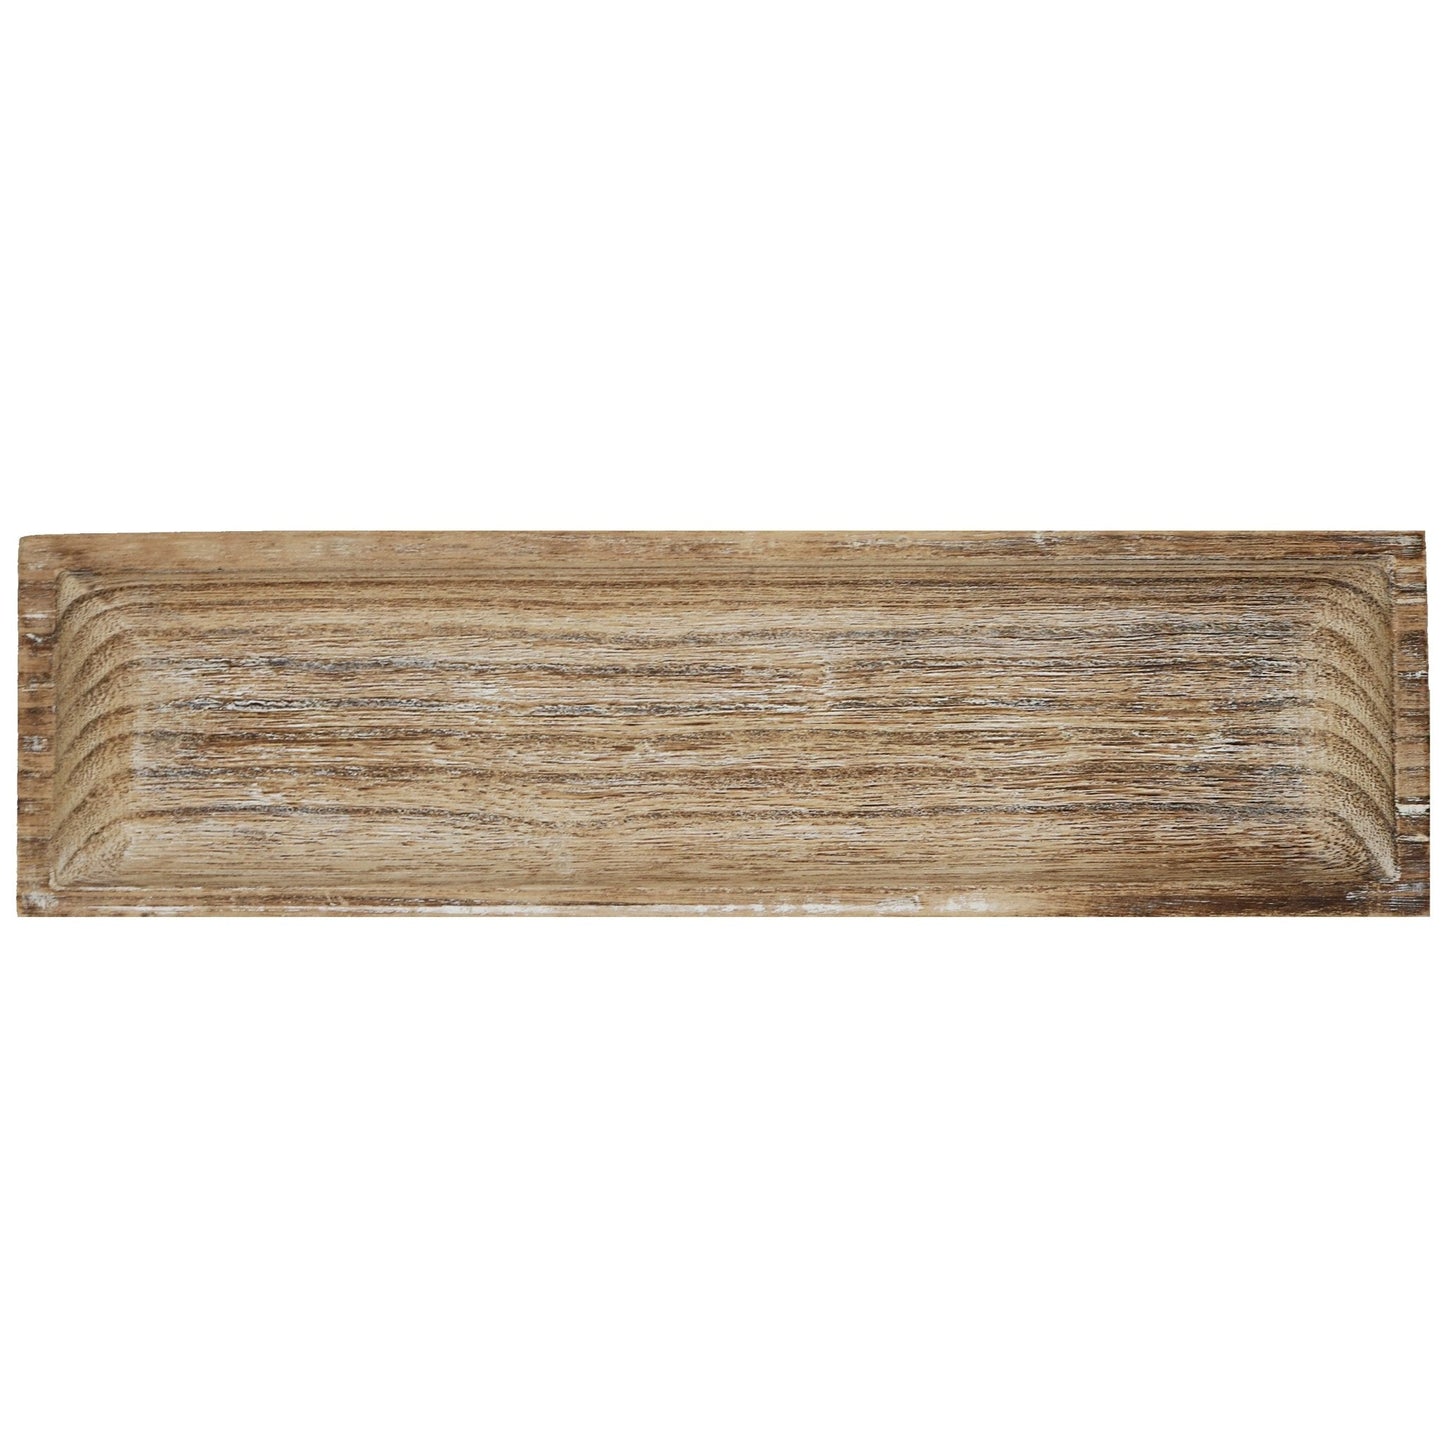 Rustic Rectangular Wood Tray by Sweet Water Decor